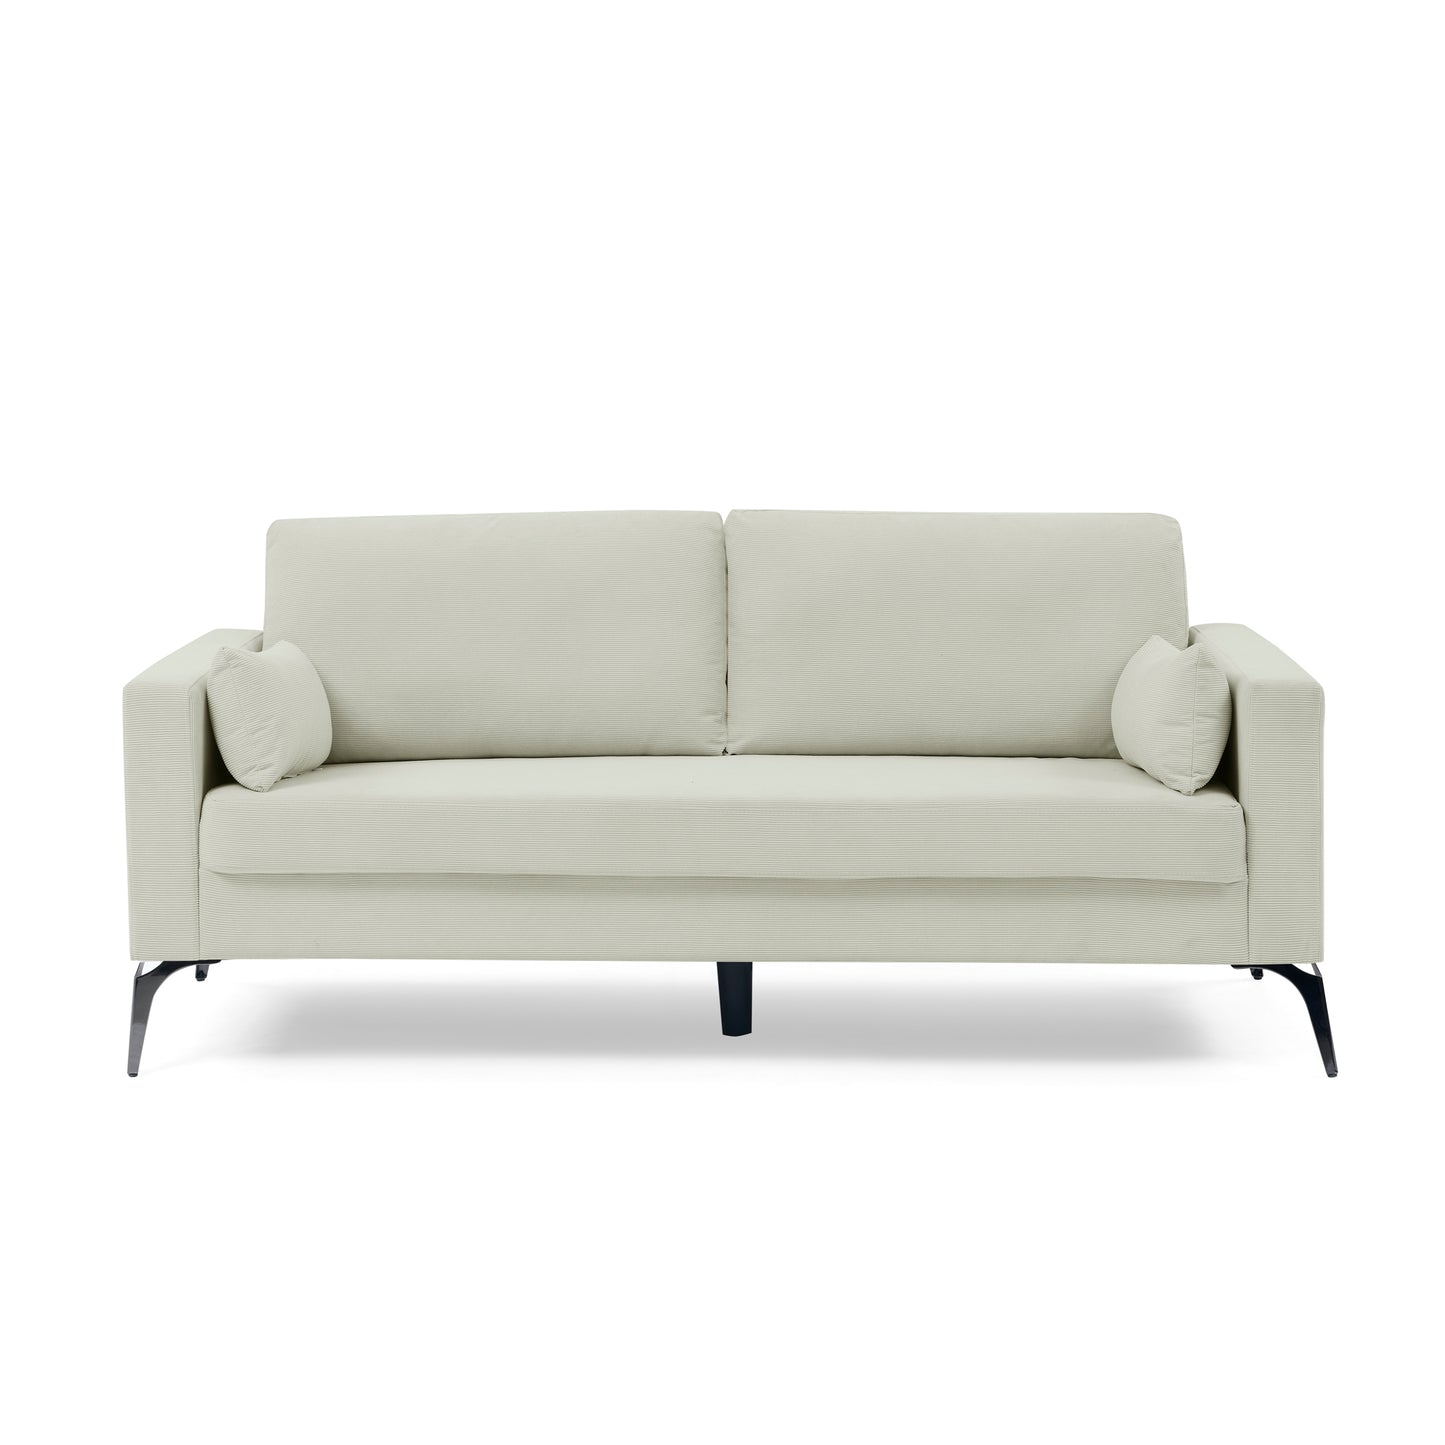 3-Seater Sofa with Square Arms and Tight Back, with Two Small Pillows,Corduroy Beige